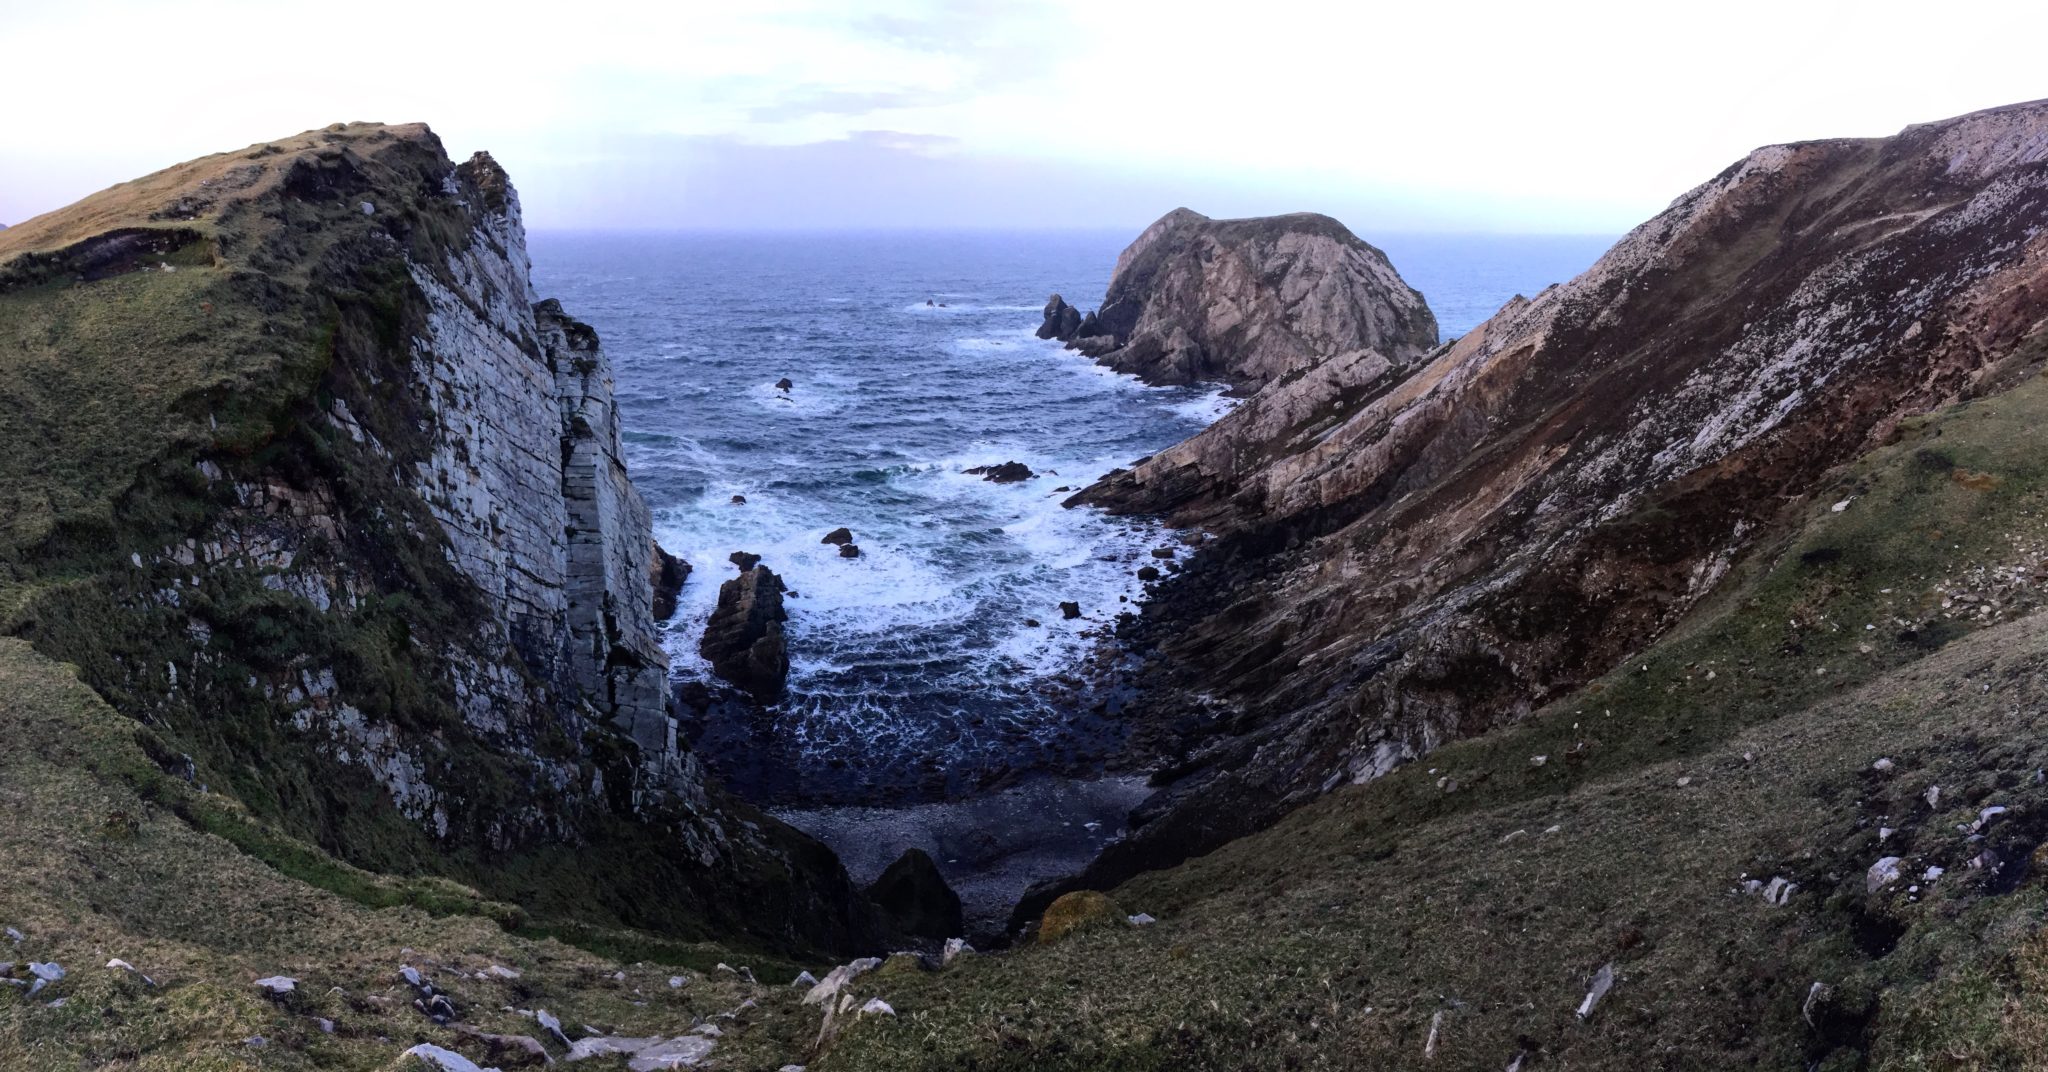 A sweeping rocky coastline at Port Donegal